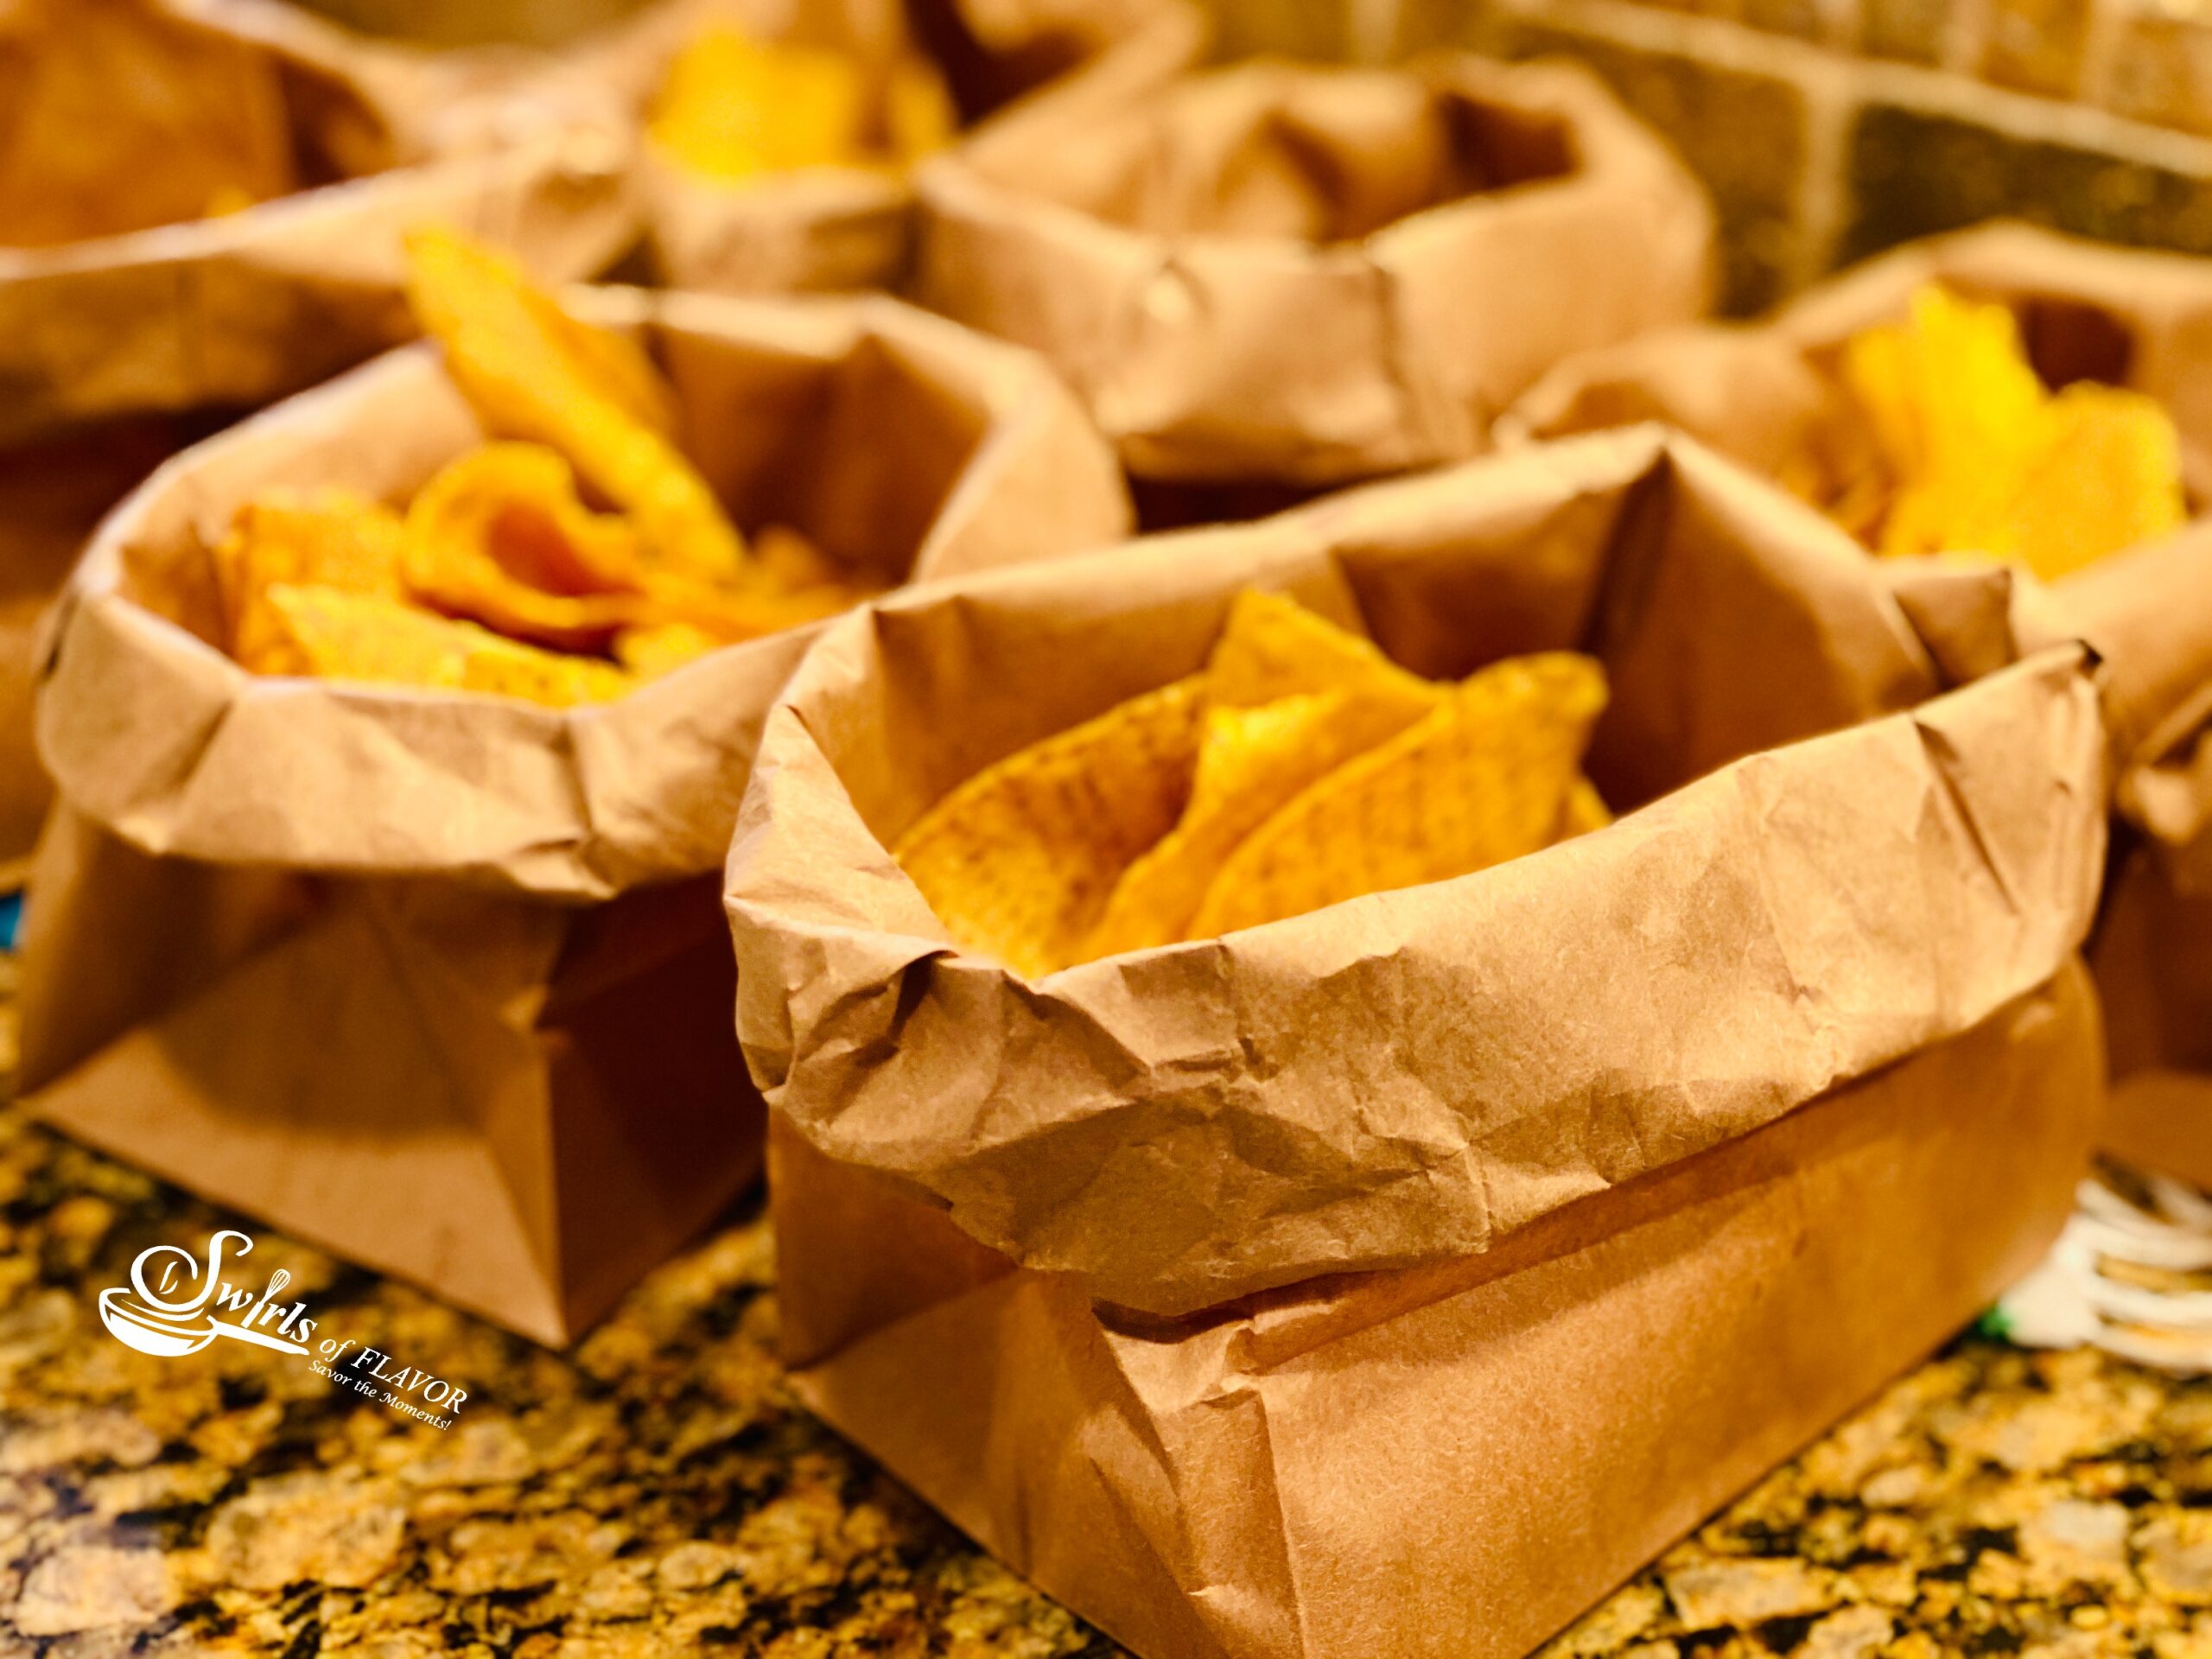 tortilla chips served in brown paper bags